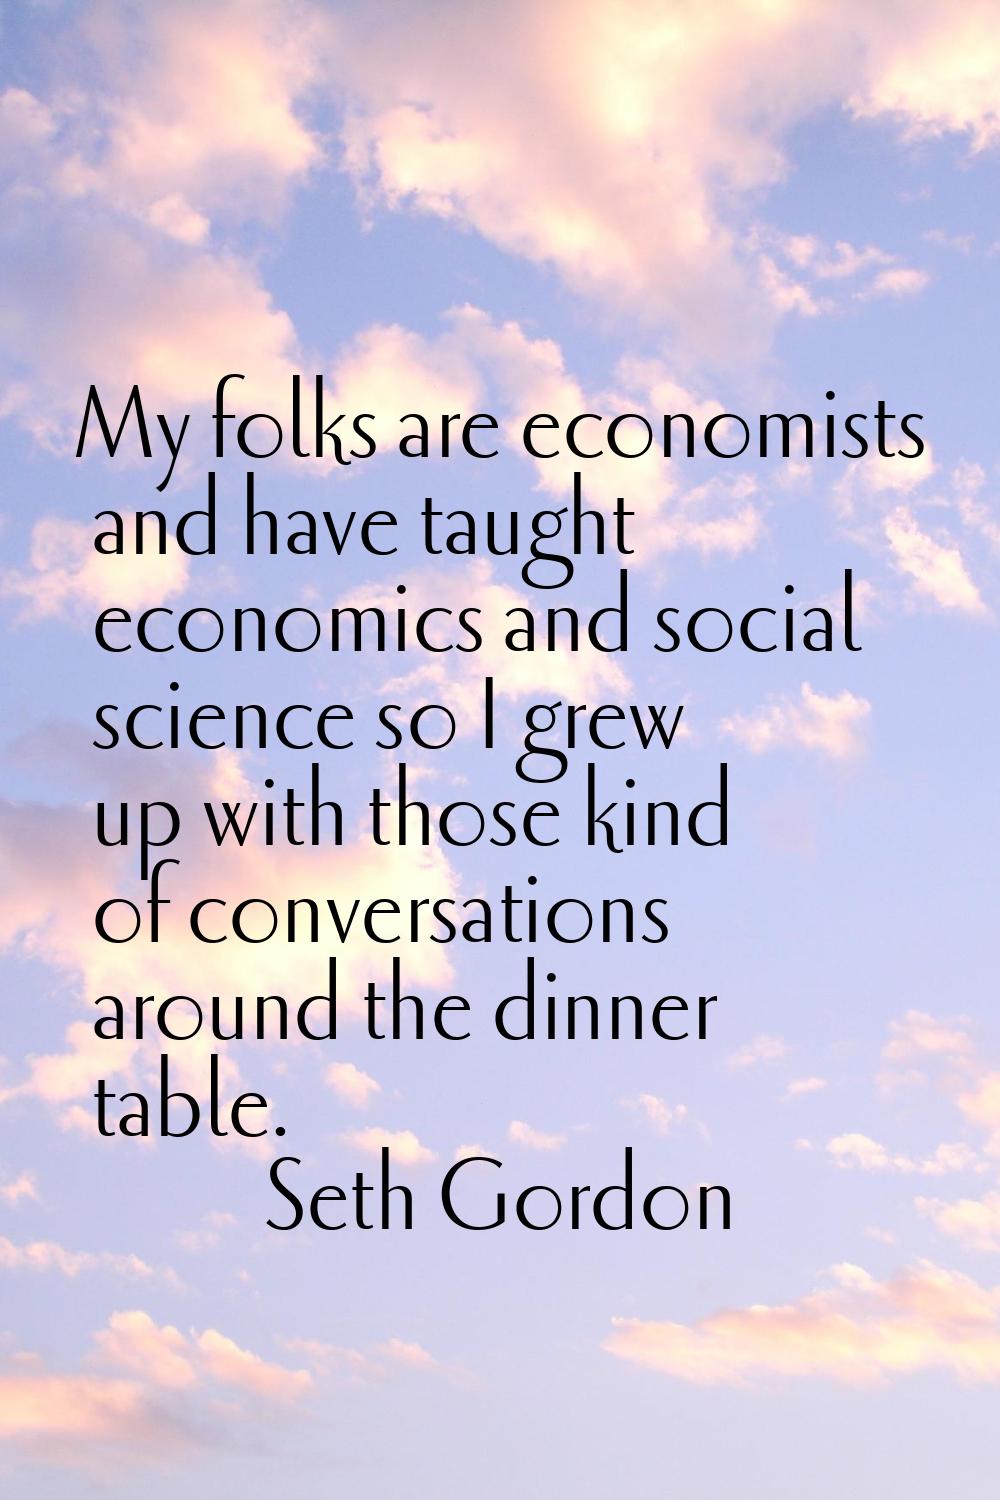 My folks are economists and have taught economics and social science so I grew up with those kind o